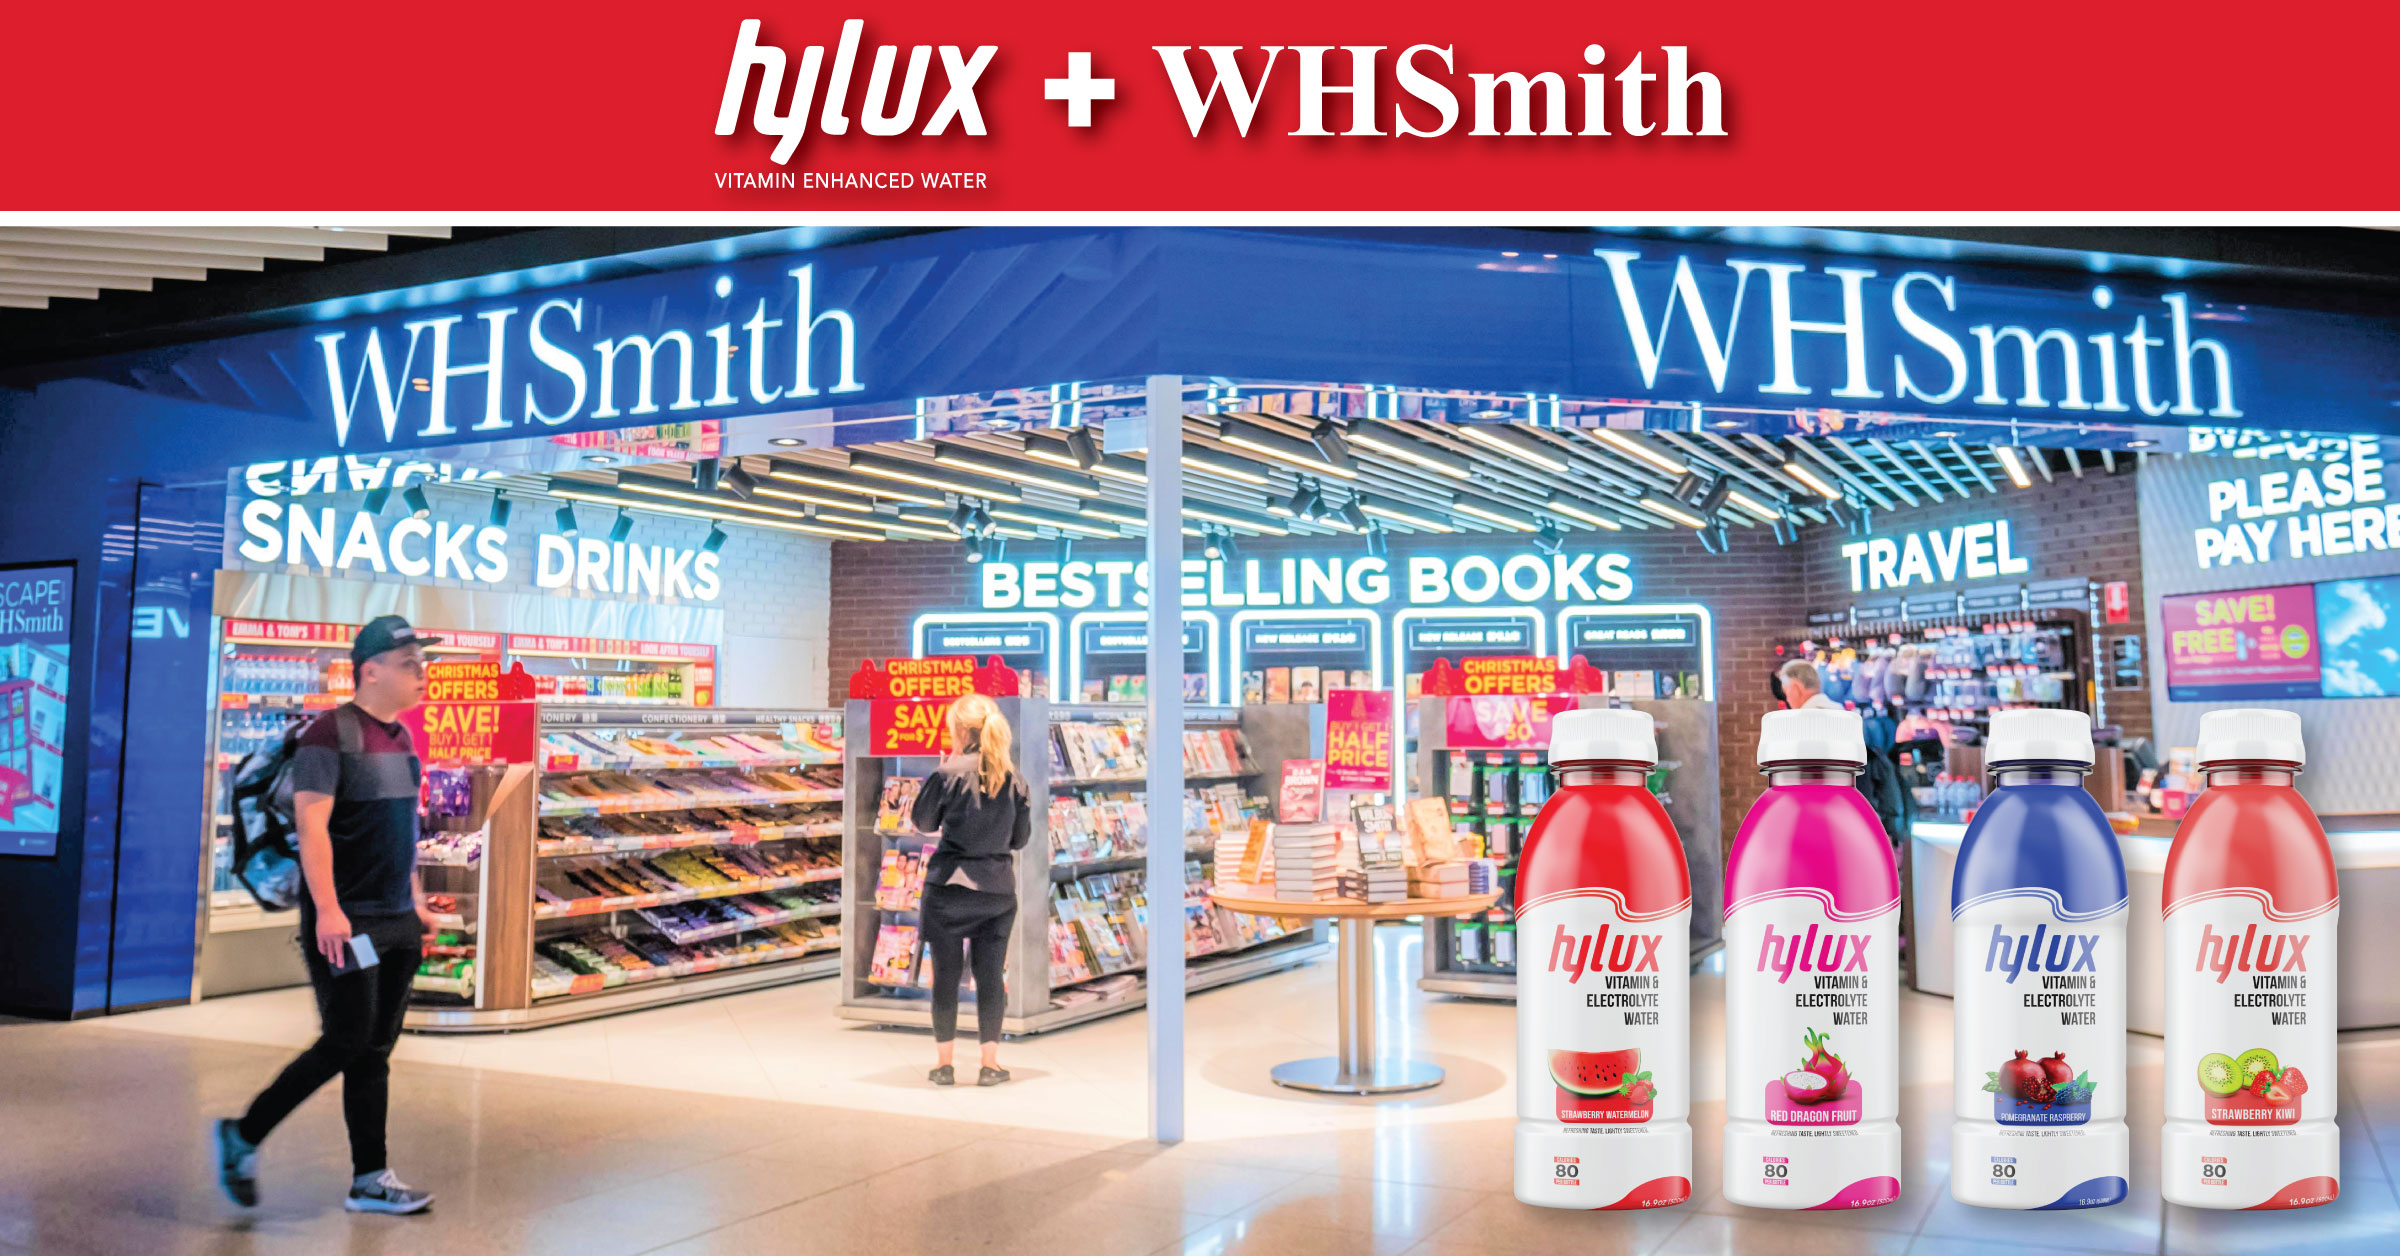 Hylux Expands International Presence Through Ongoing Partnership With WHSmith